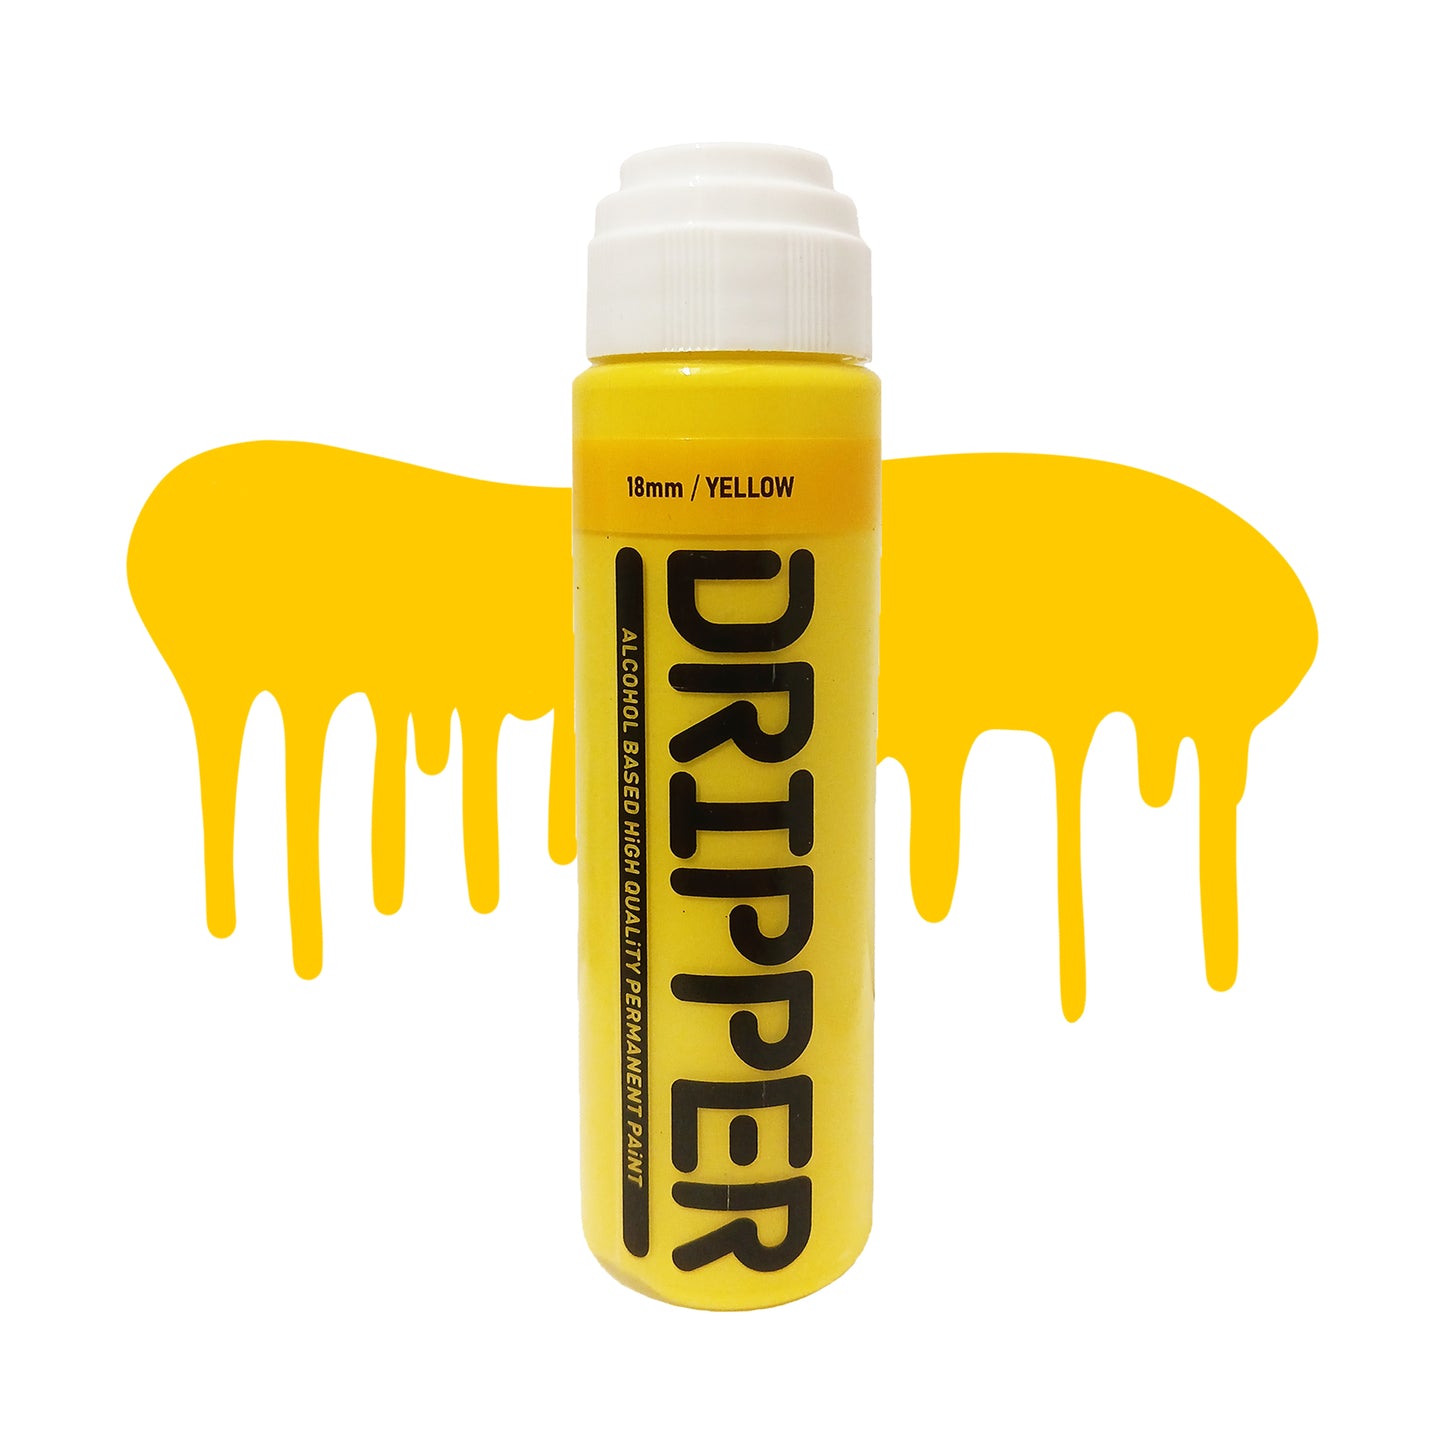 Dope Paint, Graffiti Squeeze Dripper Mop Marker in yellow.